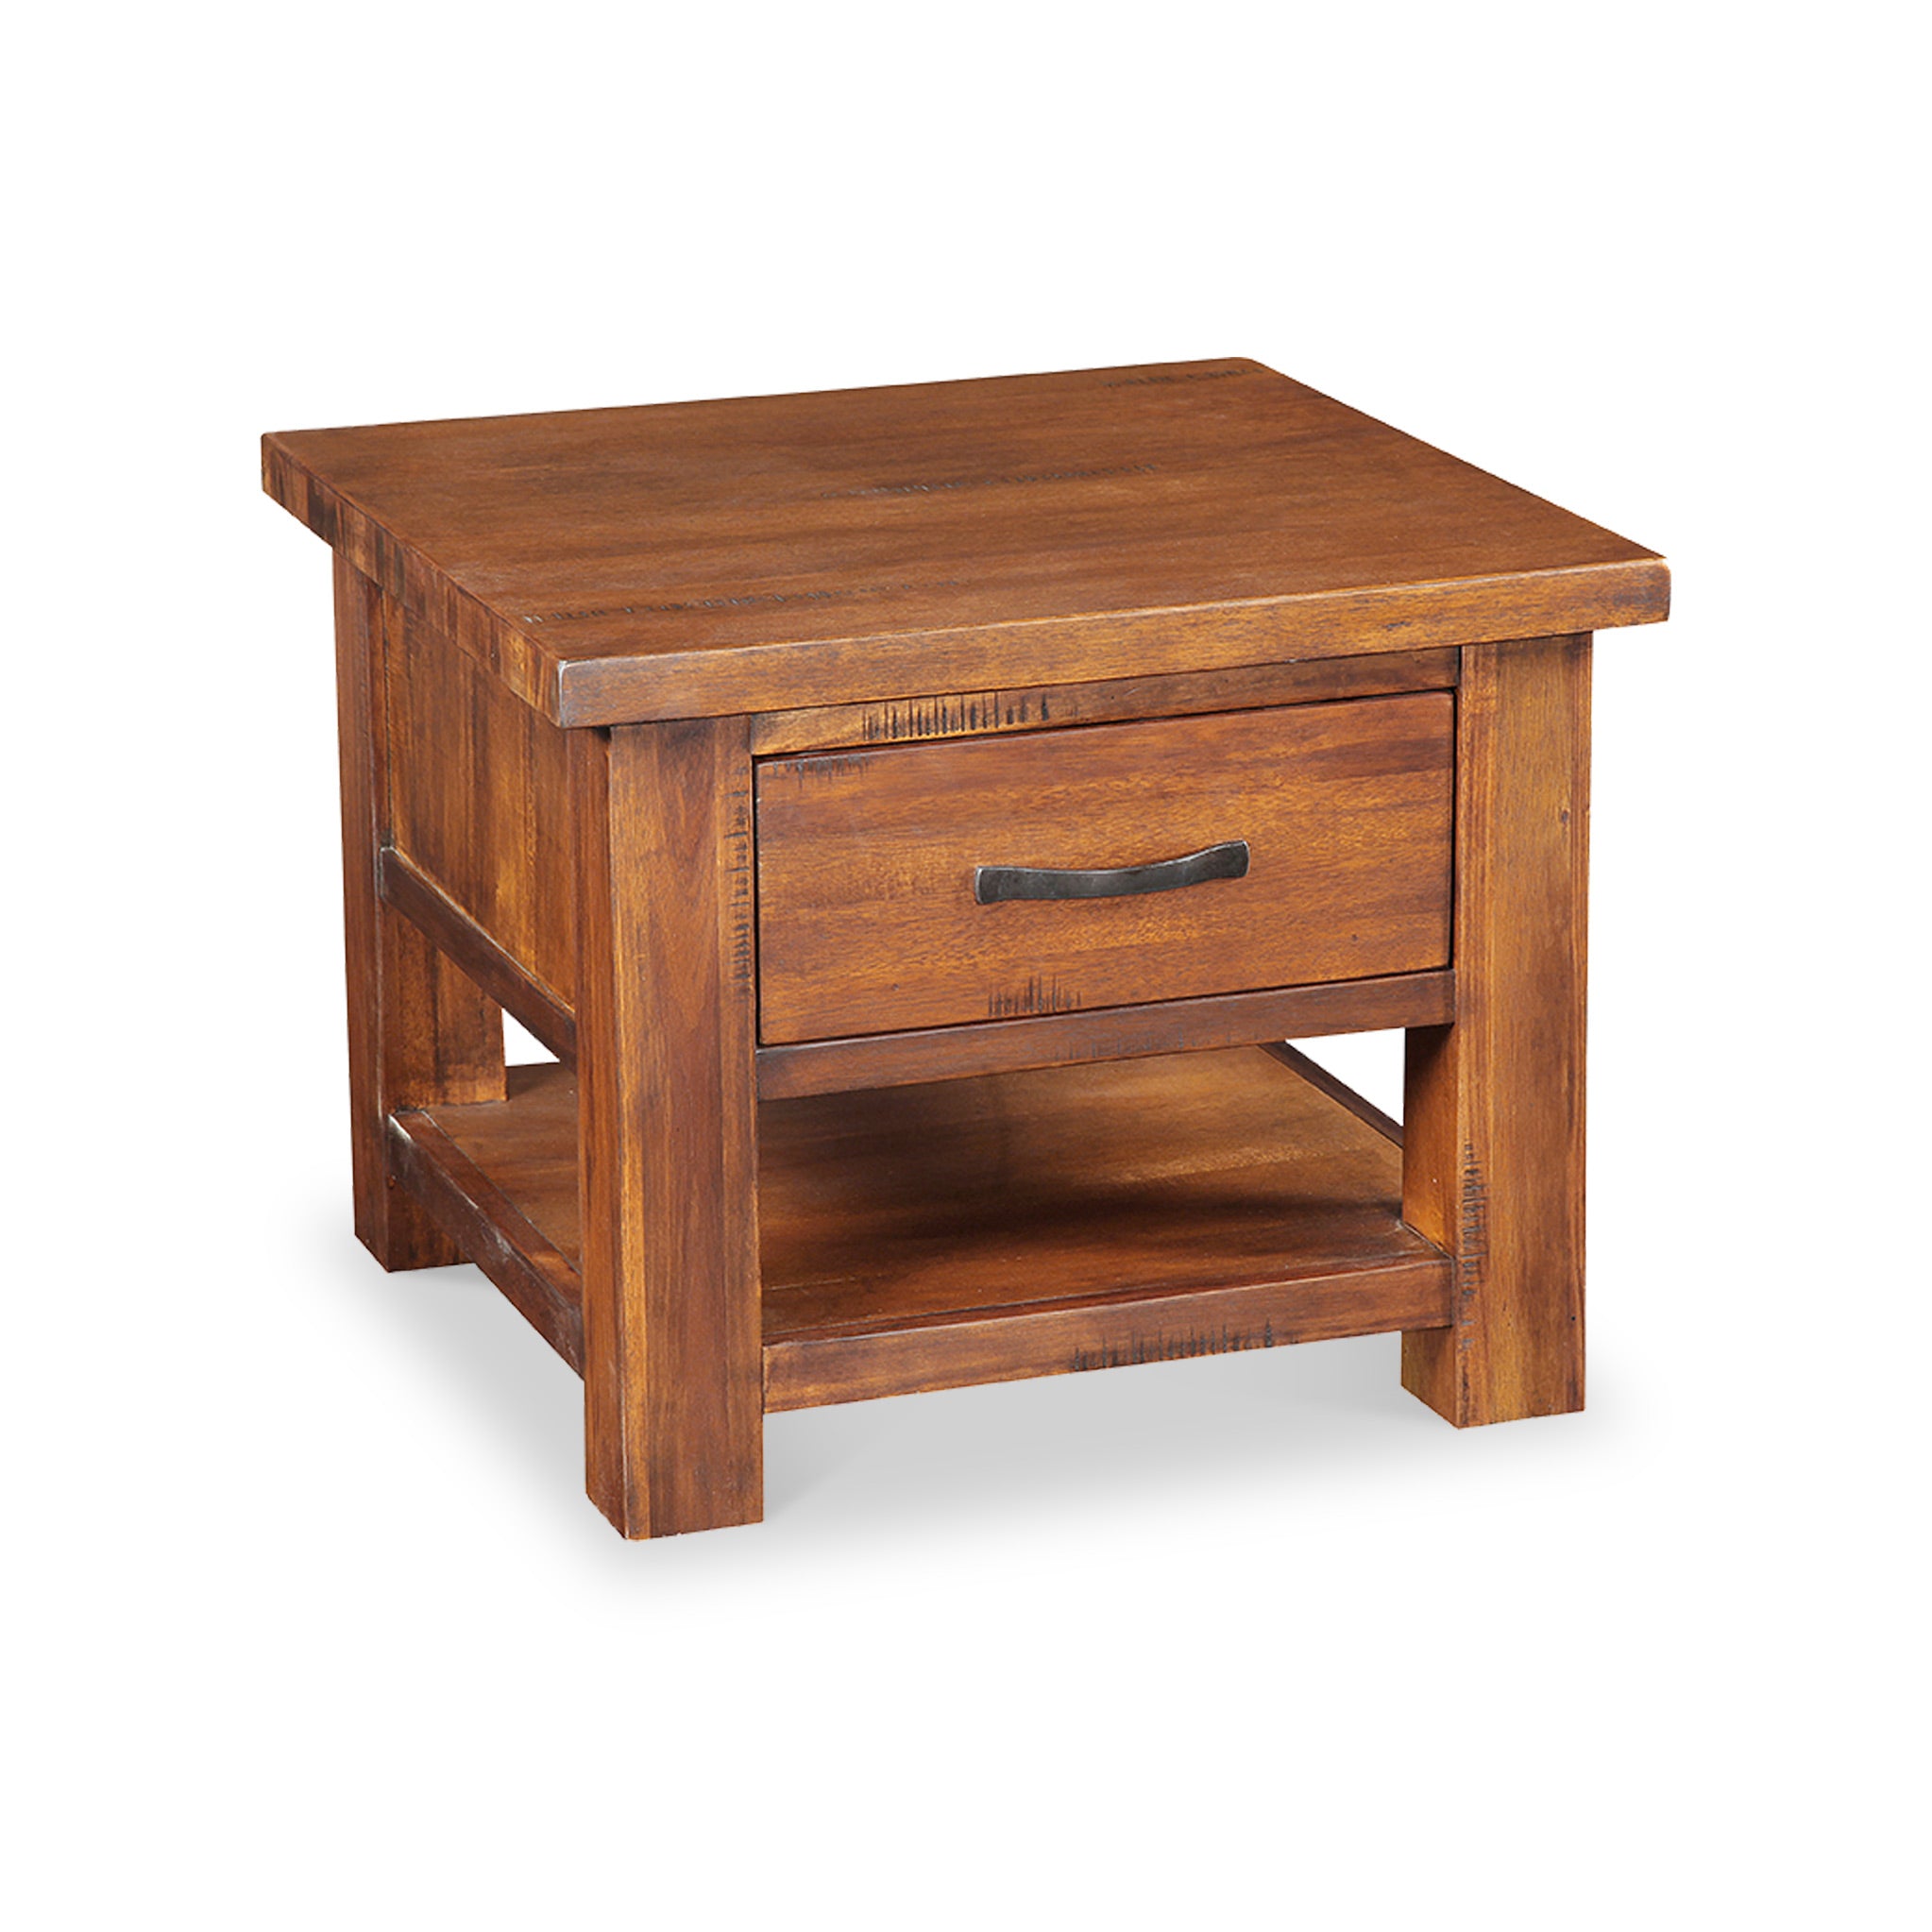 Ladock Acacia Lamp Table With Storage Drawer Roseland